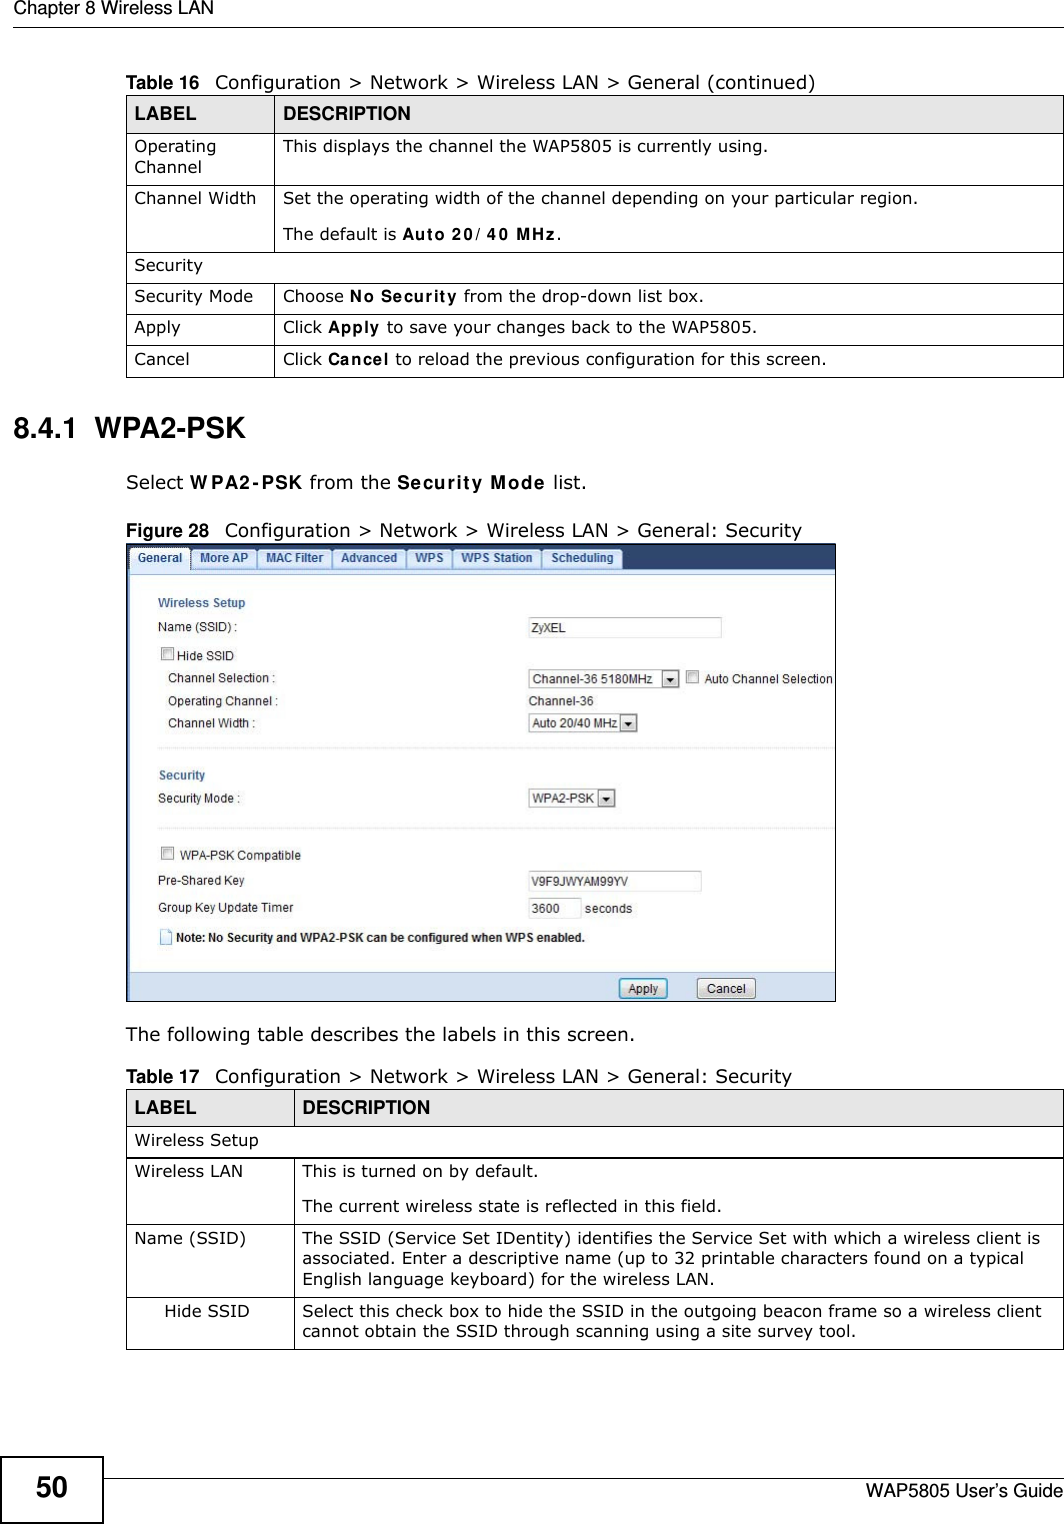 Chapter 8 Wireless LANWAP5805 User’s Guide508.4.1  WPA2-PSKSelect WPA2-PSK from the Security Mode list.Figure 28   Configuration &gt; Network &gt; Wireless LAN &gt; General: SecurityThe following table describes the labels in this screen.Operating Channel This displays the channel the WAP5805 is currently using.Channel Width Set the operating width of the channel depending on your particular region. The default is Auto 20/40 MHz.SecuritySecurity Mode Choose No Security from the drop-down list box.Apply Click Apply to save your changes back to the WAP5805.Cancel Click Cancel to reload the previous configuration for this screen.Table 16   Configuration &gt; Network &gt; Wireless LAN &gt; General (continued)LABEL DESCRIPTIONTable 17   Configuration &gt; Network &gt; Wireless LAN &gt; General: SecurityLABEL DESCRIPTIONWireless SetupWireless LAN This is turned on by default. The current wireless state is reflected in this field.Name (SSID)  The SSID (Service Set IDentity) identifies the Service Set with which a wireless client is associated. Enter a descriptive name (up to 32 printable characters found on a typical English language keyboard) for the wireless LAN. Hide SSID Select this check box to hide the SSID in the outgoing beacon frame so a wireless client cannot obtain the SSID through scanning using a site survey tool.